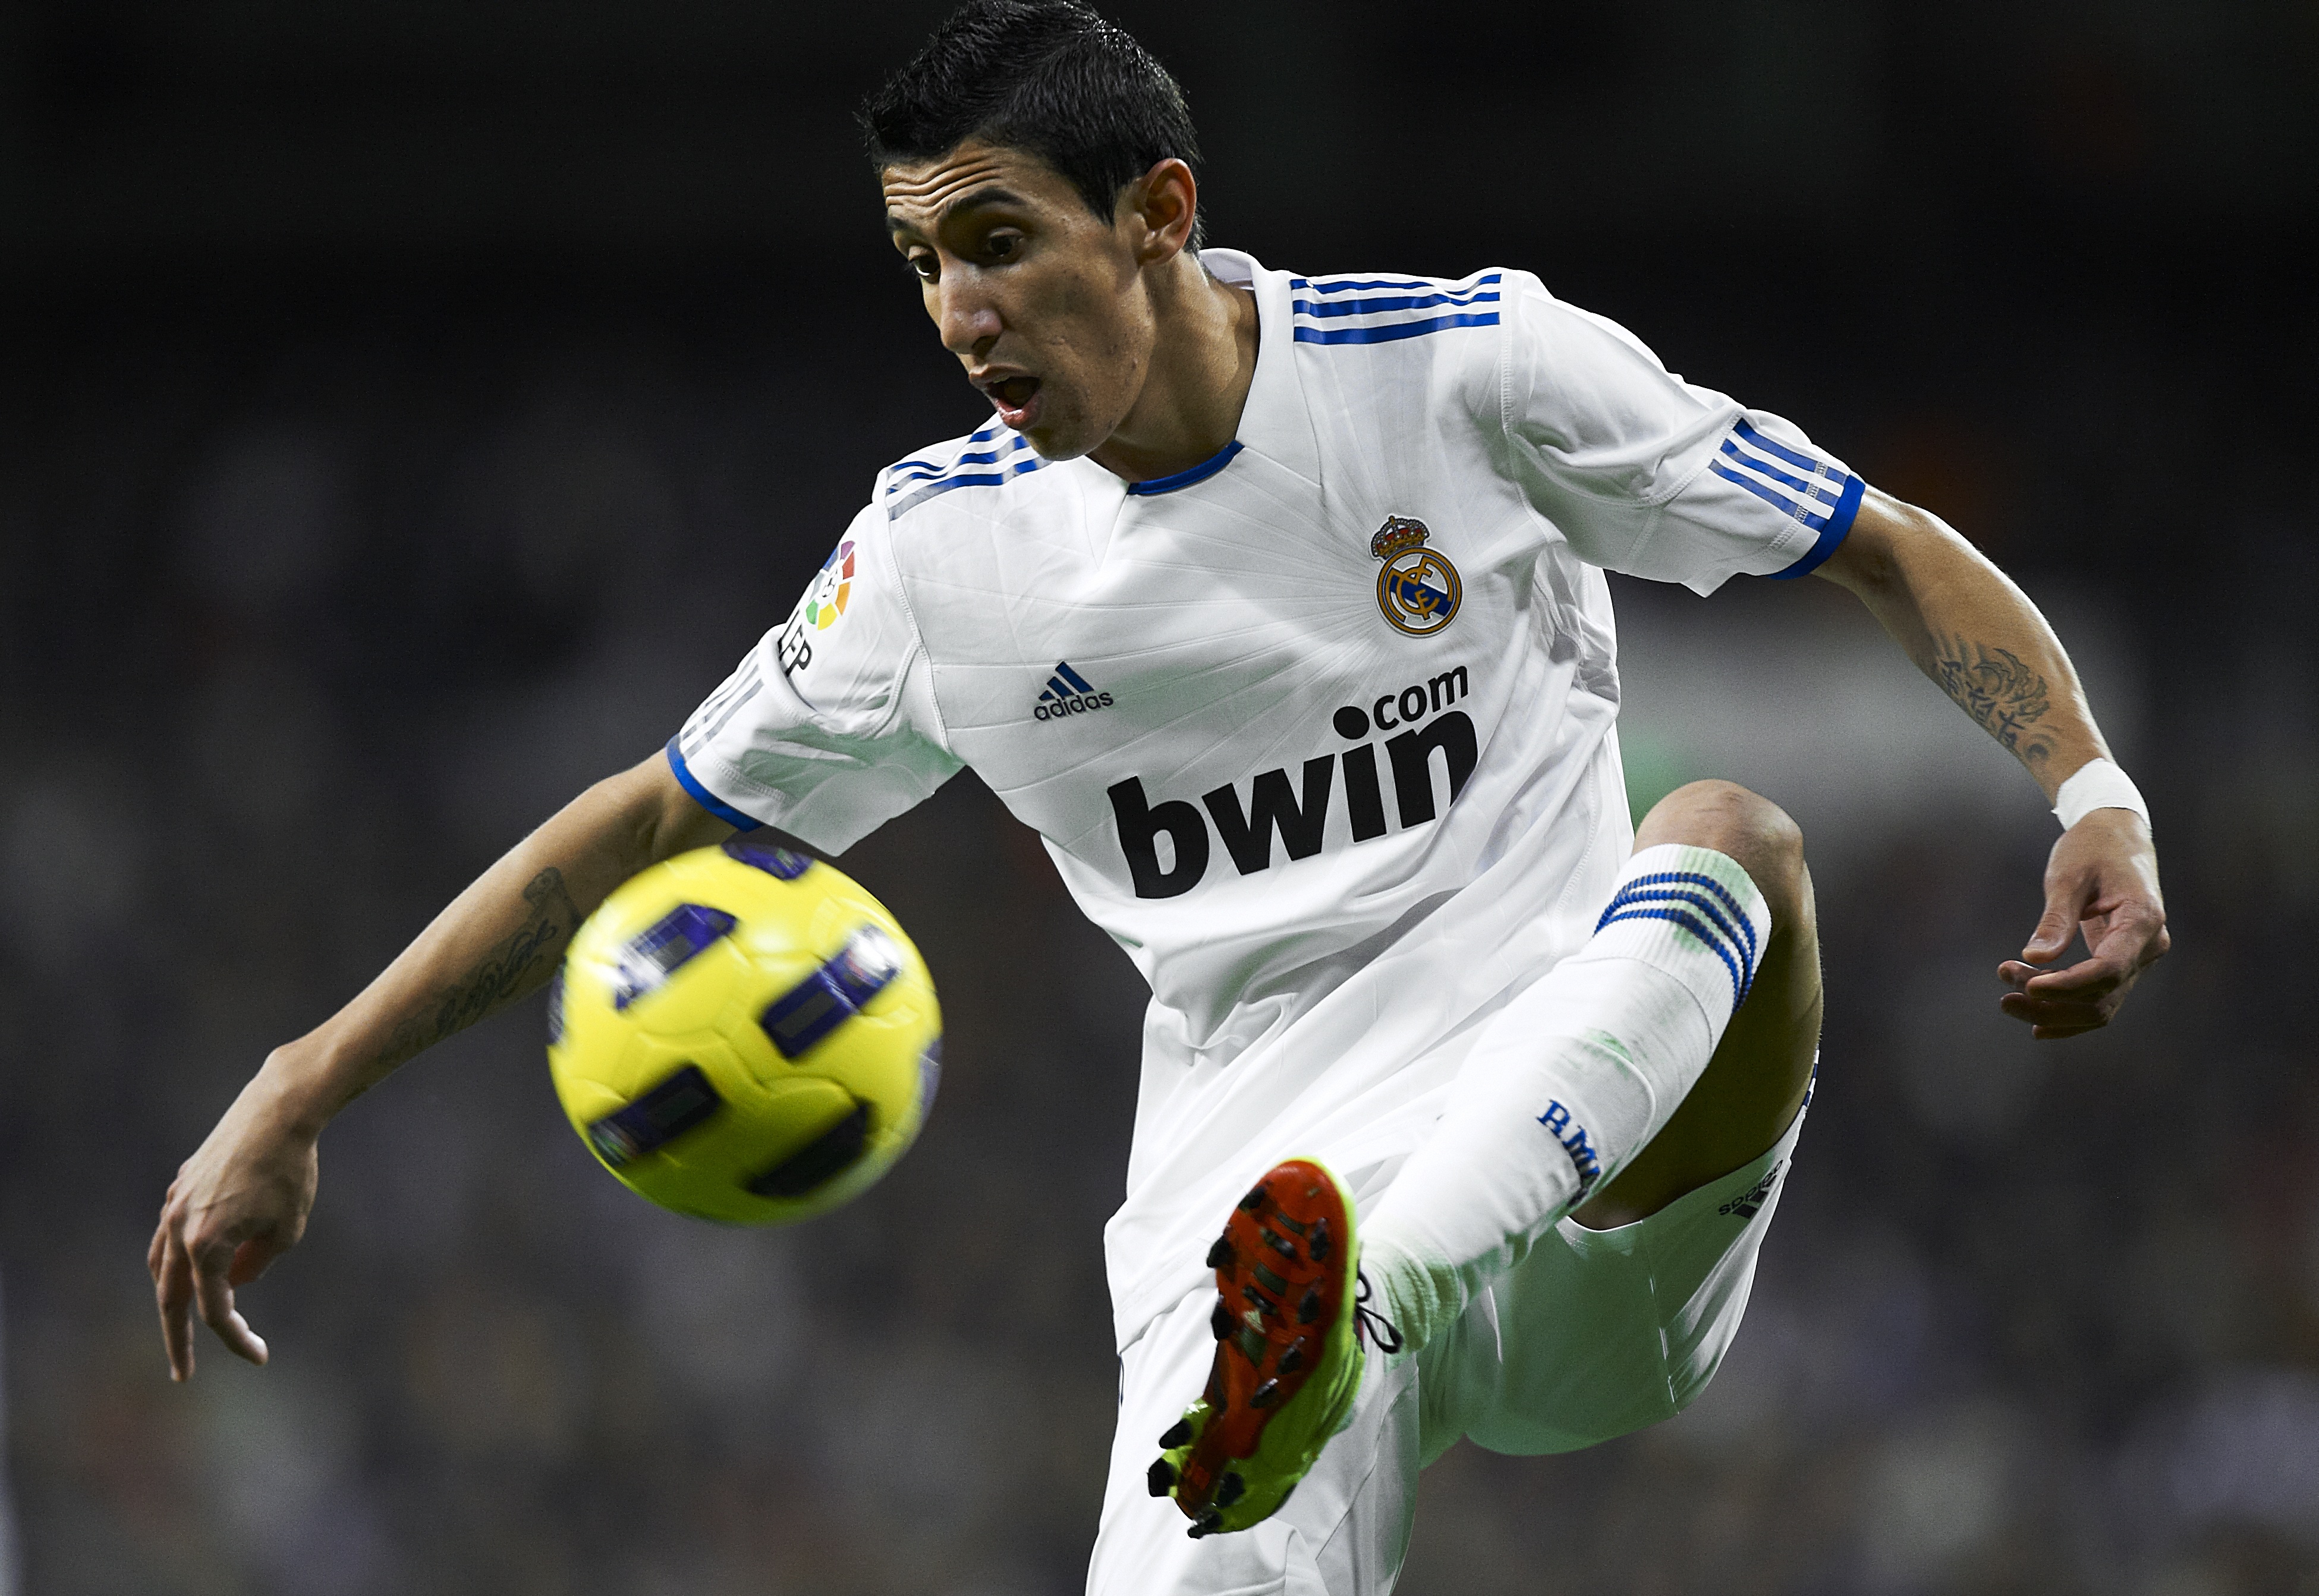 MADRID, SPAIN - NOVEMBER 20:  Angel Di Maria of Real Madrid controls the ball during the La Liga match between Real Madrid and Athletic Bilbao at Estadio Santiago Bernabeu on November 20, 2010 in Madrid, Spain. Real Madrid won 5-1.  (Photo by Manuel Queim